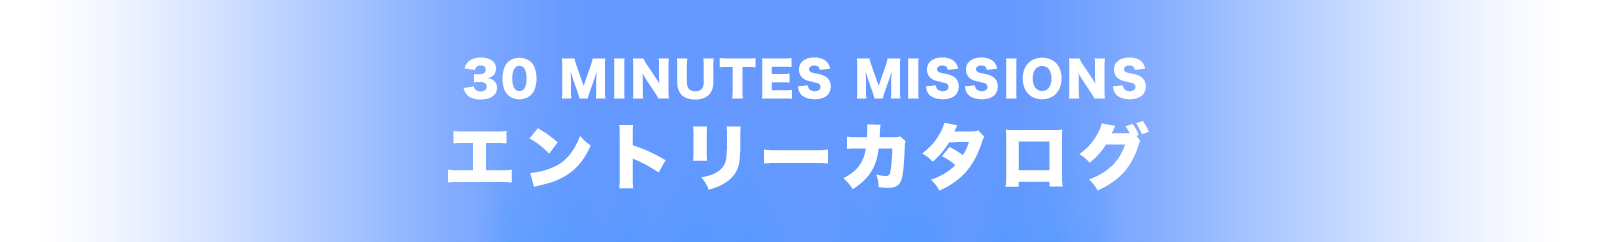 30 MINUTES MISSIONS エントリーカタログ